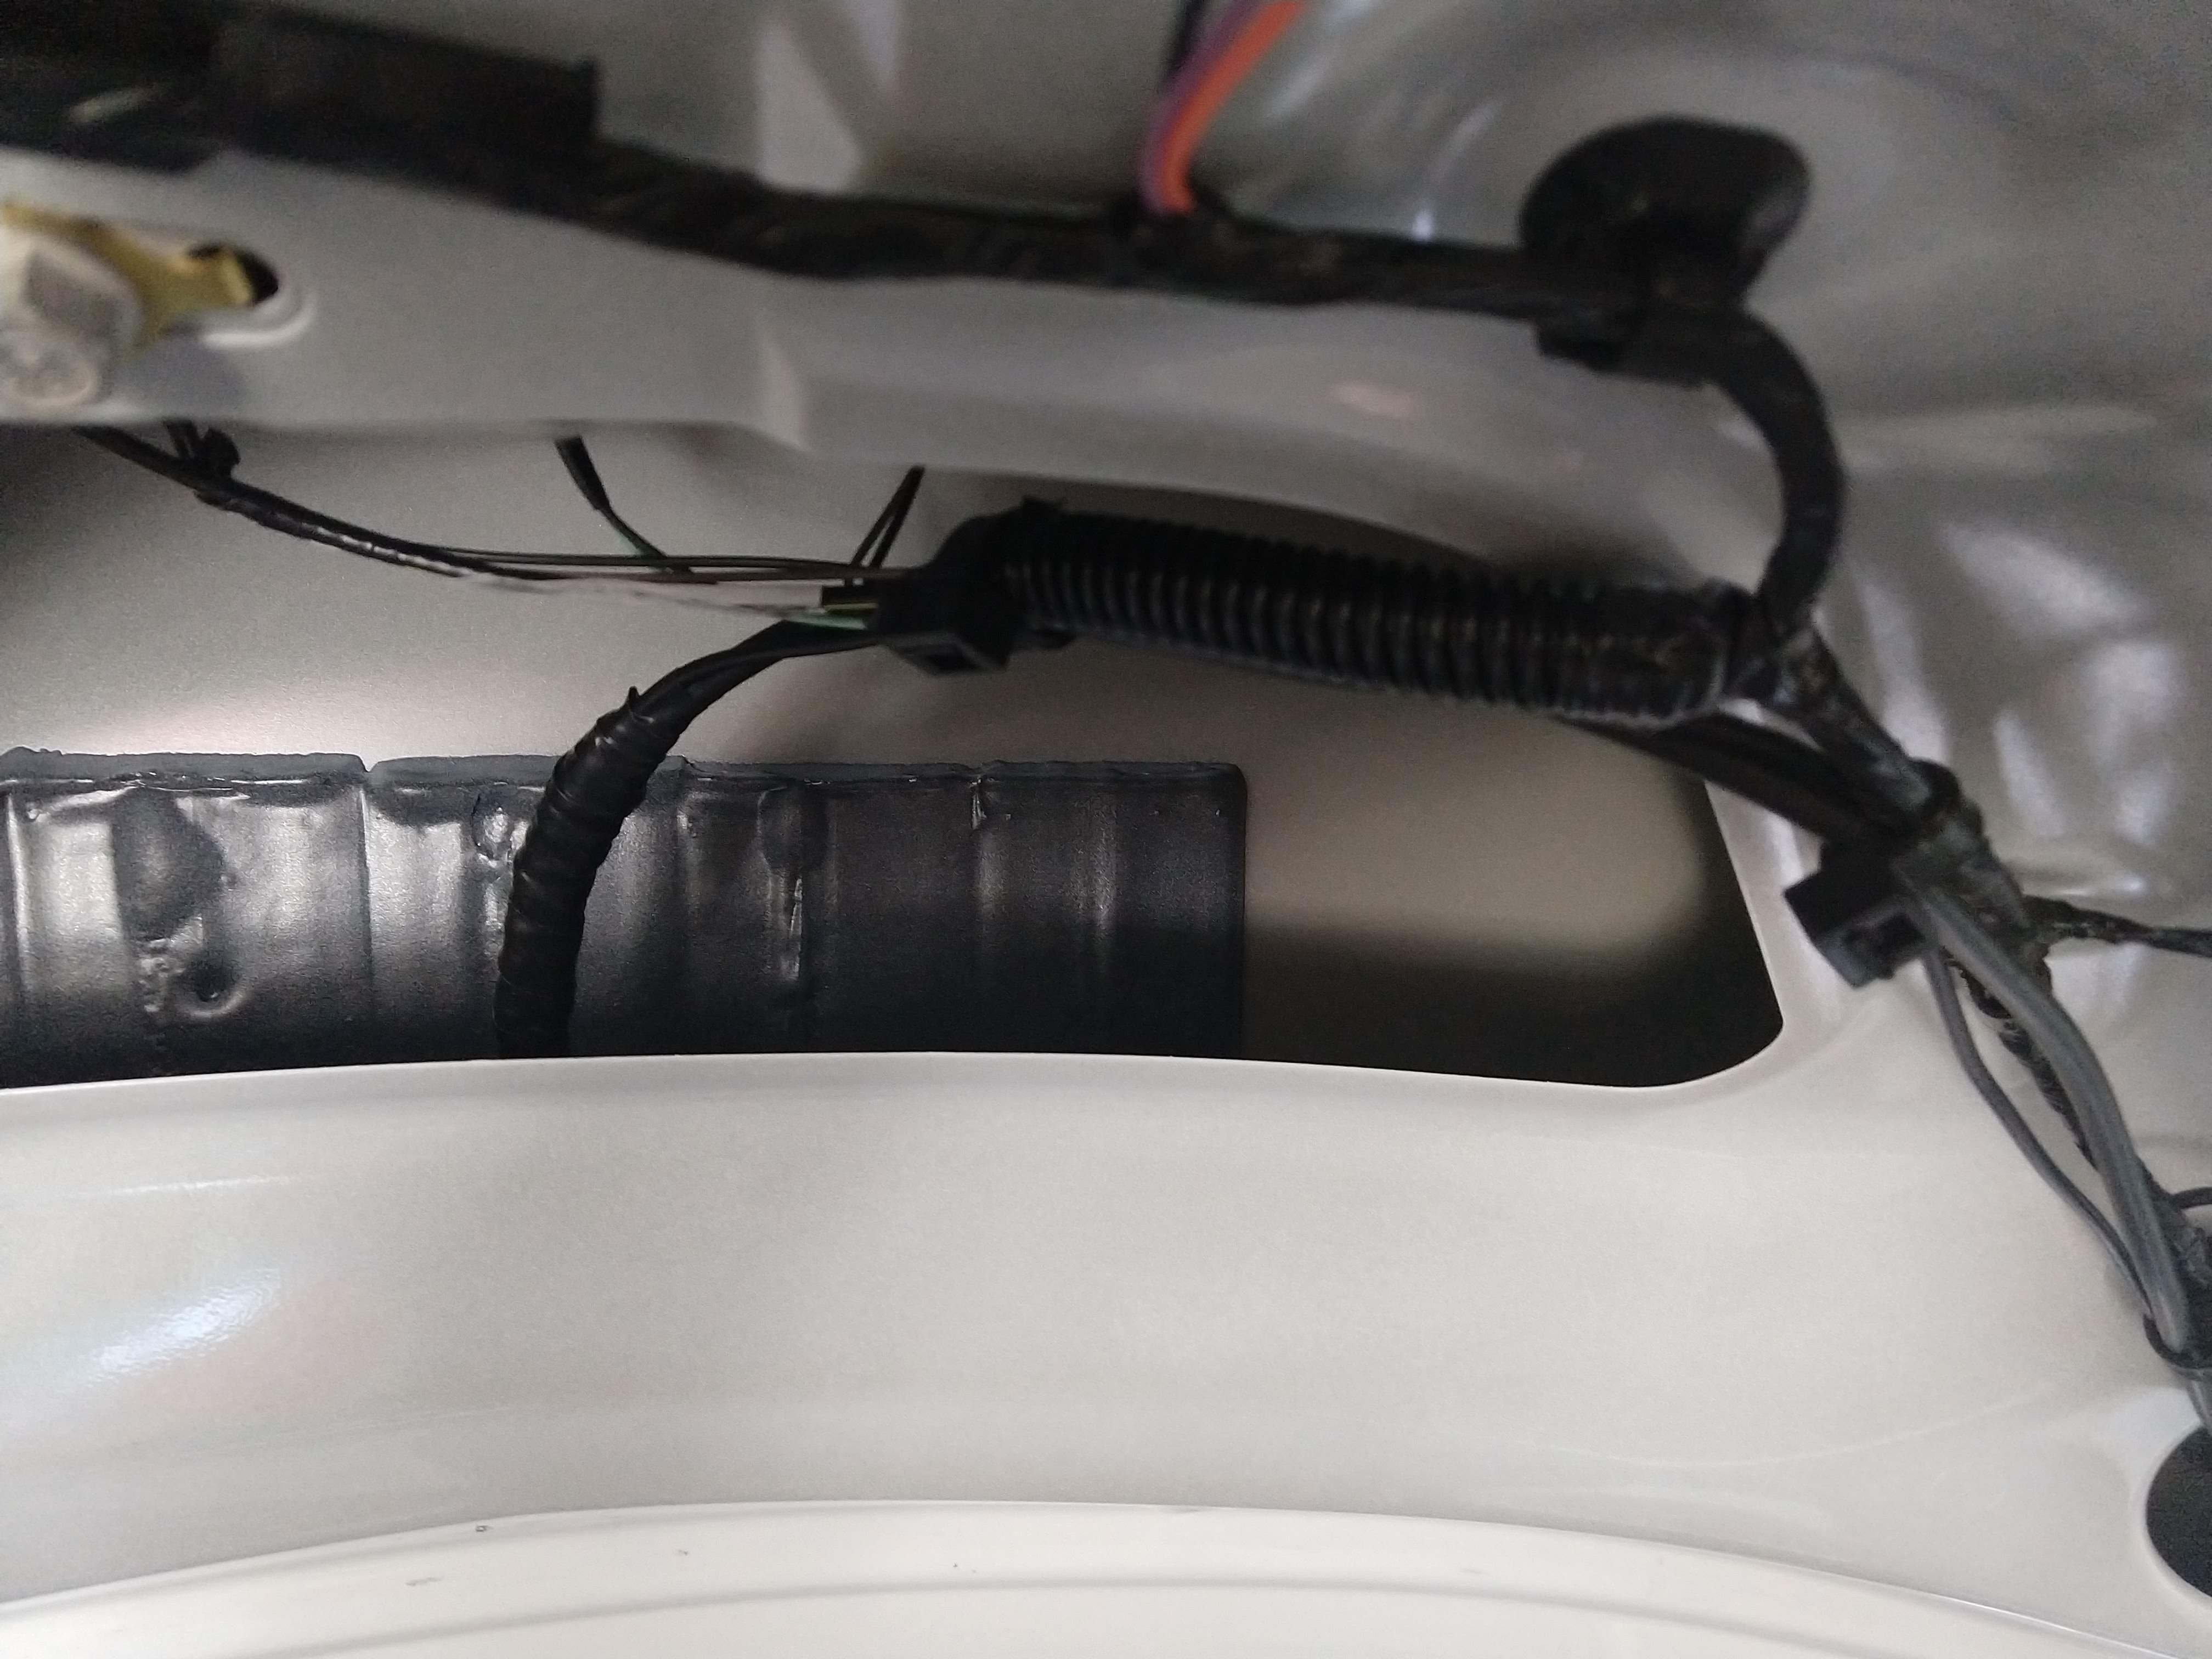 coax joining trunk lid wiring